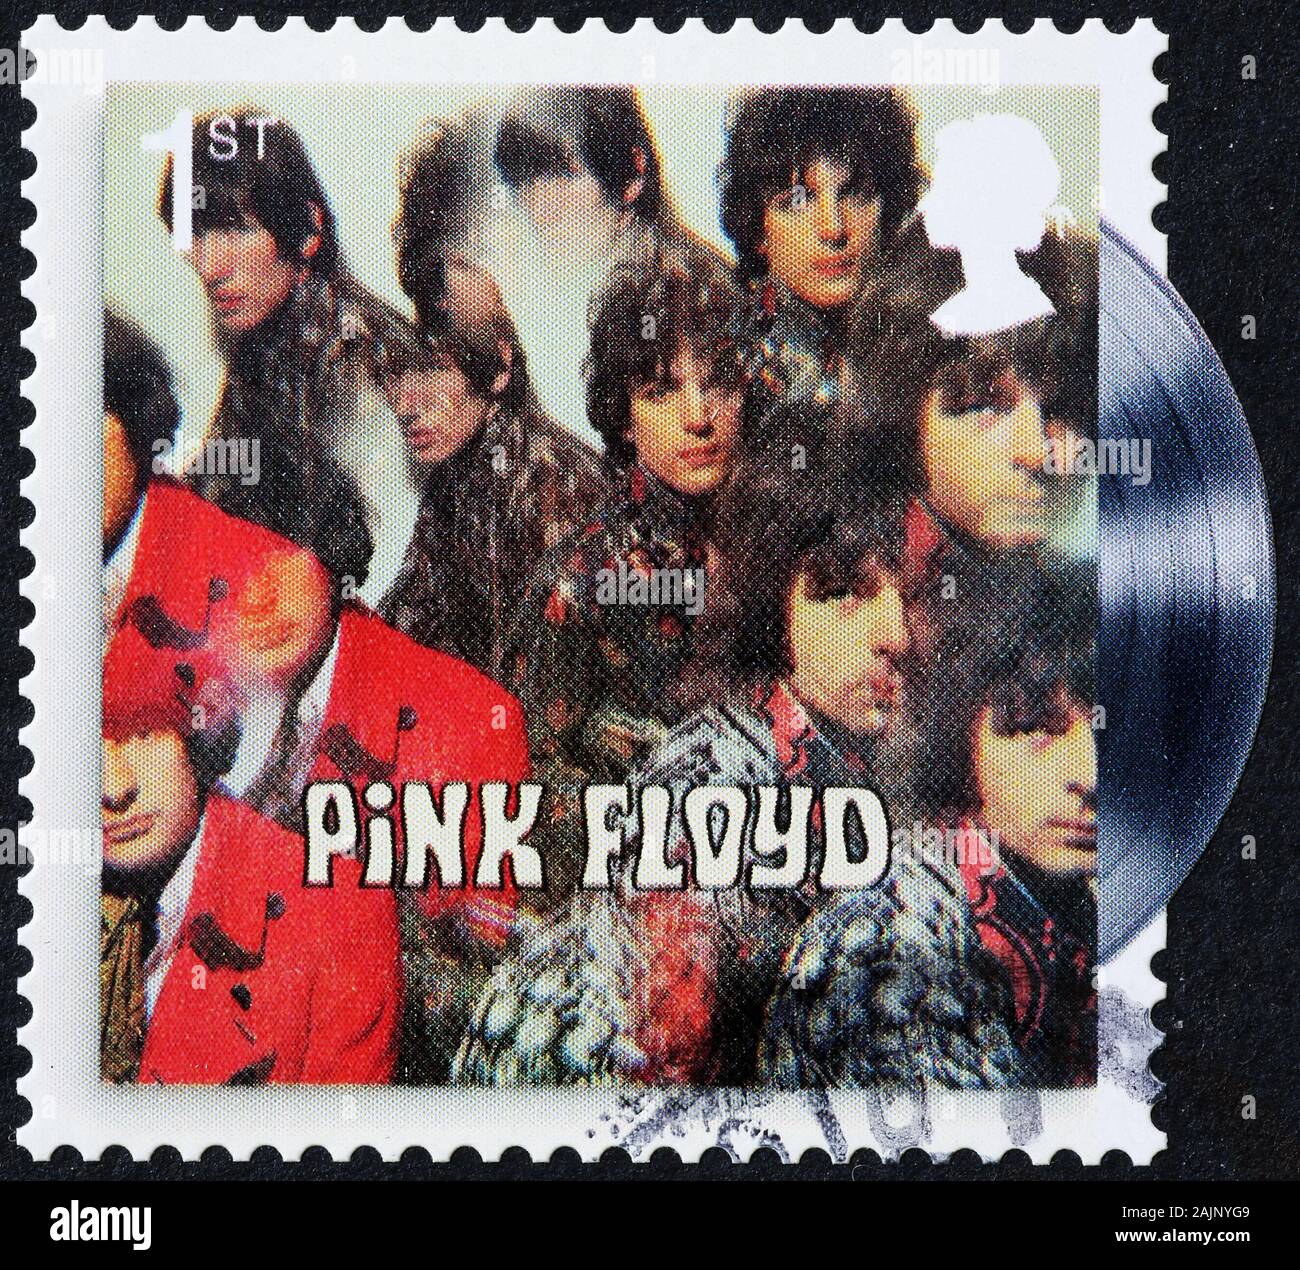 Cover of early record by Pink Floyd on stamp Stock Photo